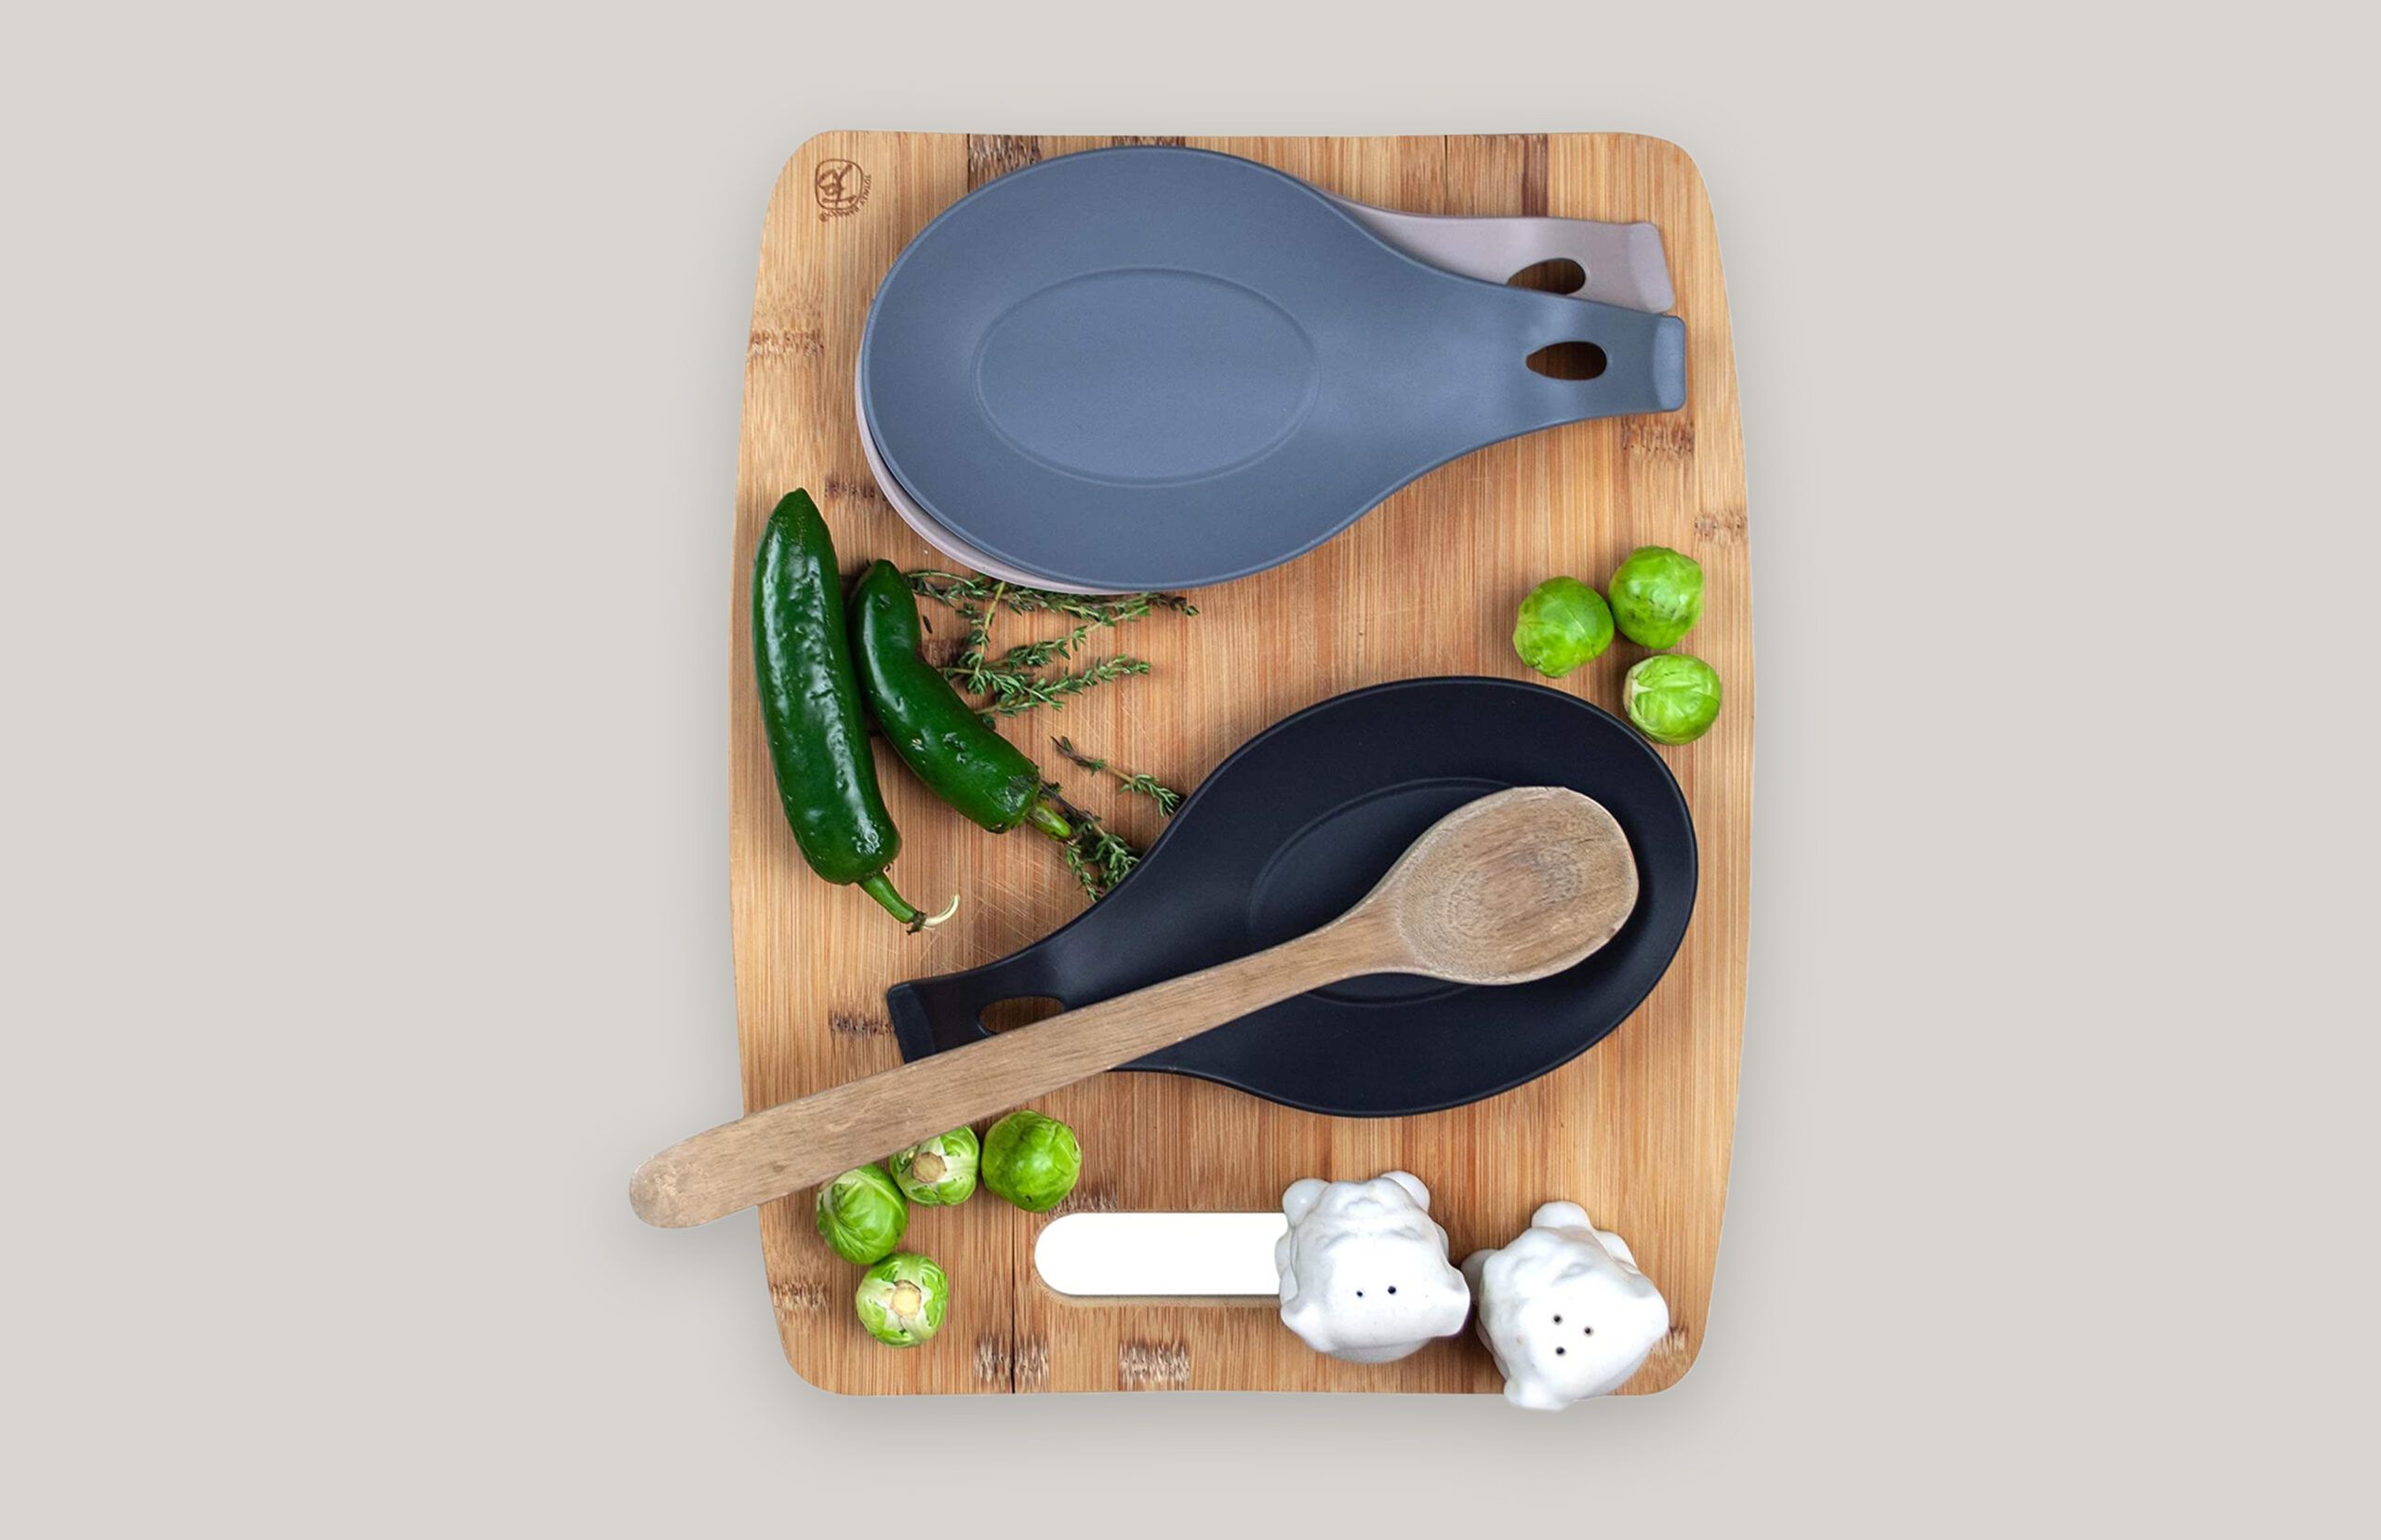 https://s42814.pcdn.co/wp-content/uploads/2020/10/Modern_Silicone_Spoon_Rest_copy_Kitchen_Gadgets-scaled.jpg.optimal.jpg